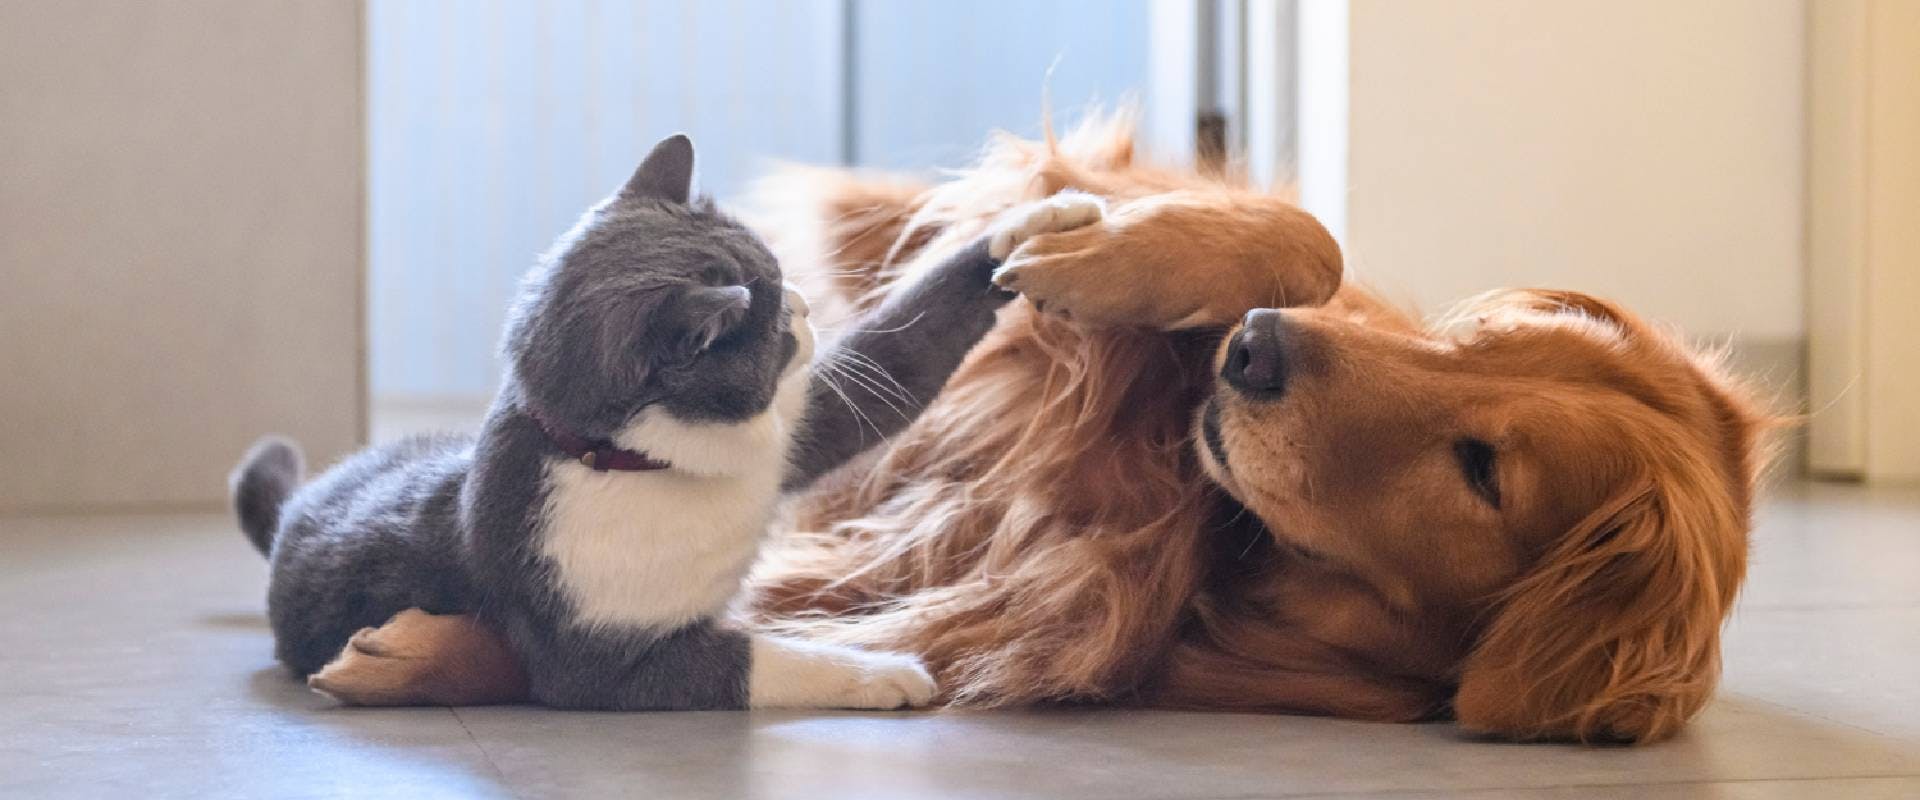 red golden retriever playing with a white and grey cat